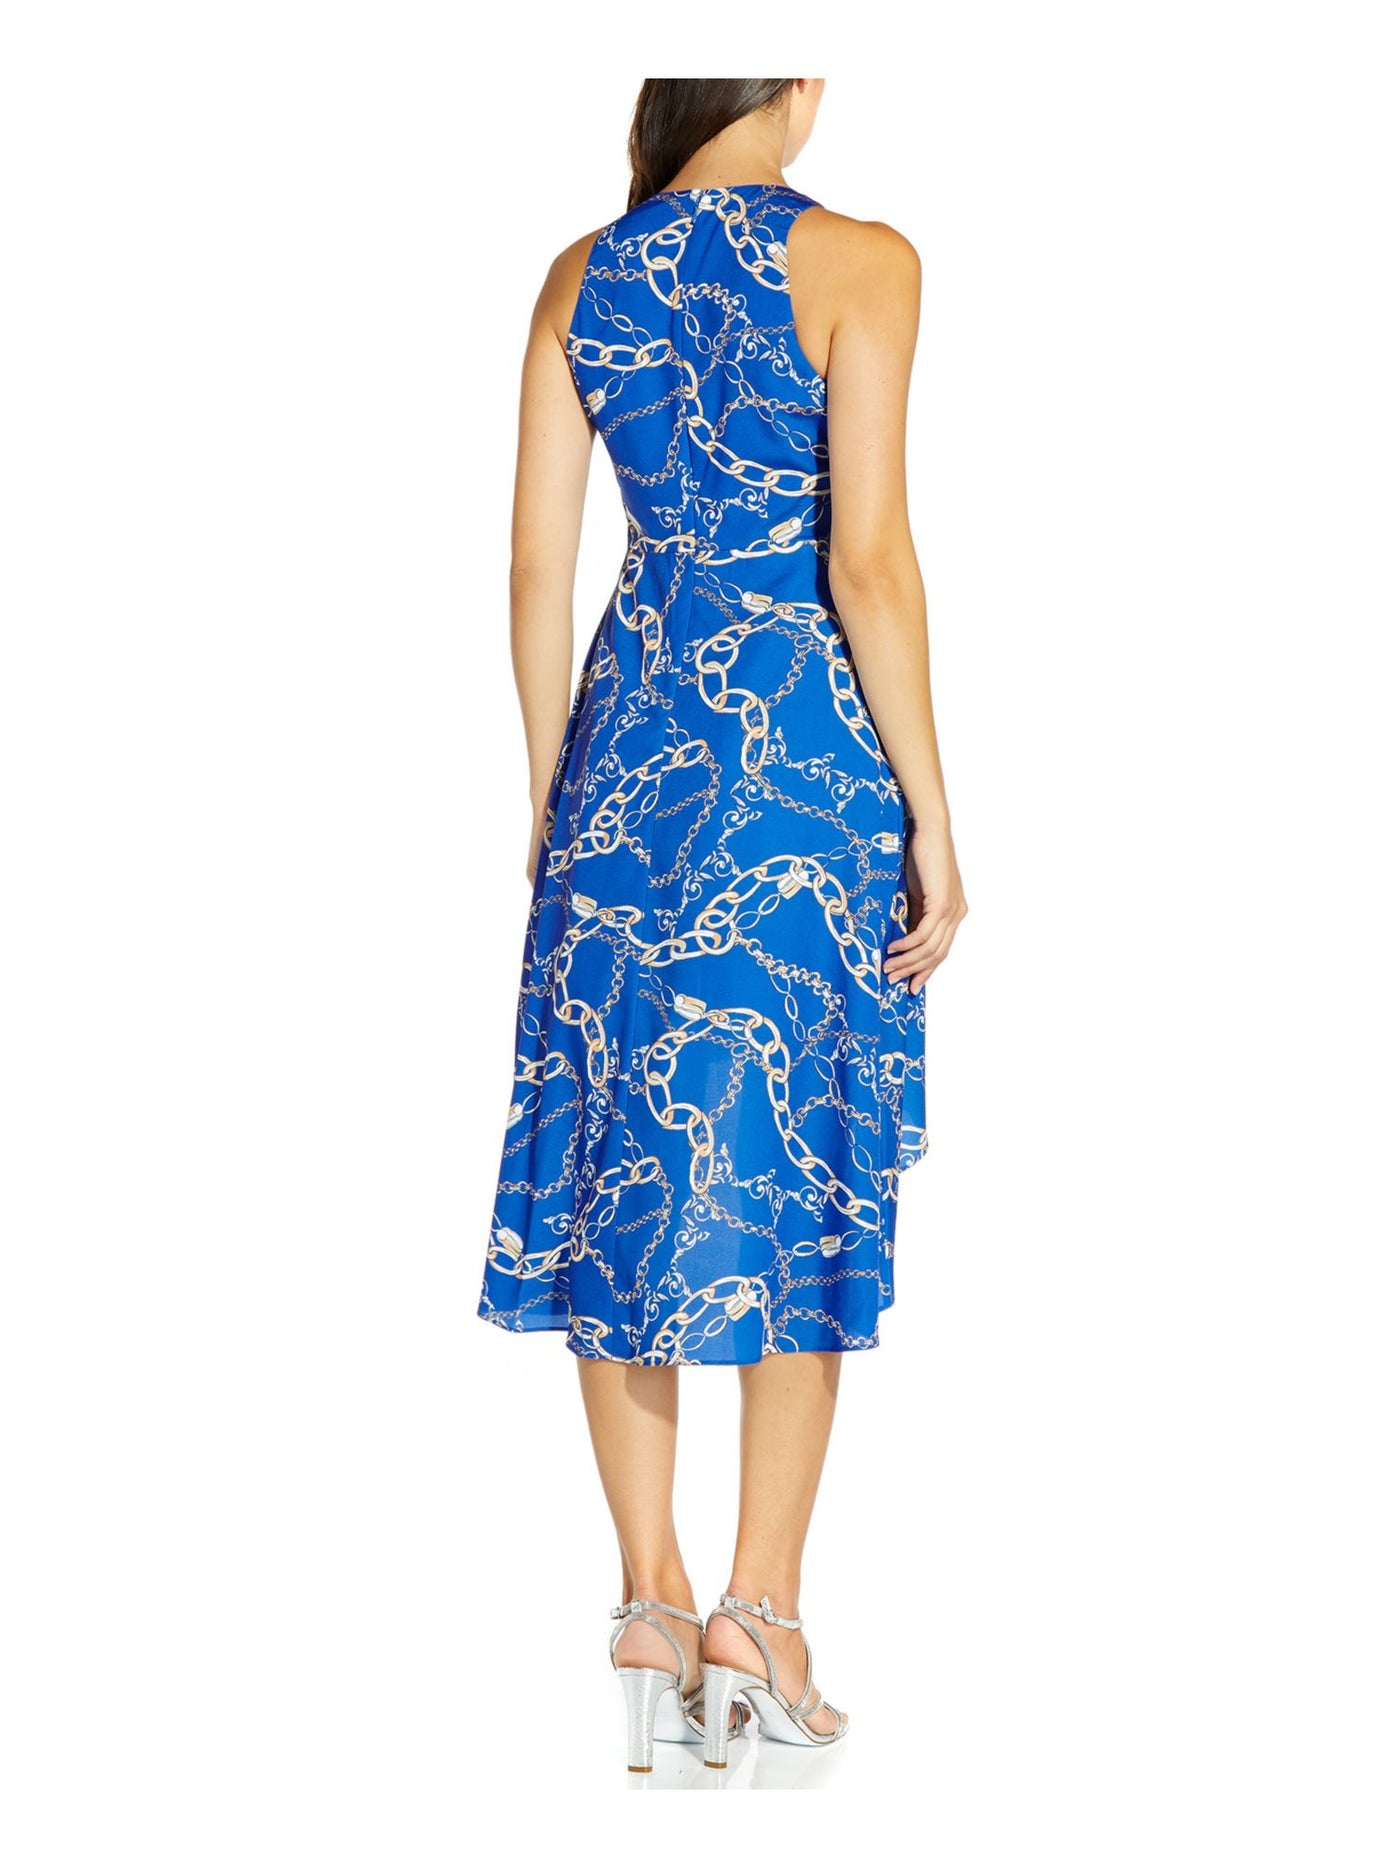 ADRIANNA PAPELL Womens Blue Zippered Hi-low Printed Sleeveless Crew Neck Below The Knee Party Fit + Flare Dress 12